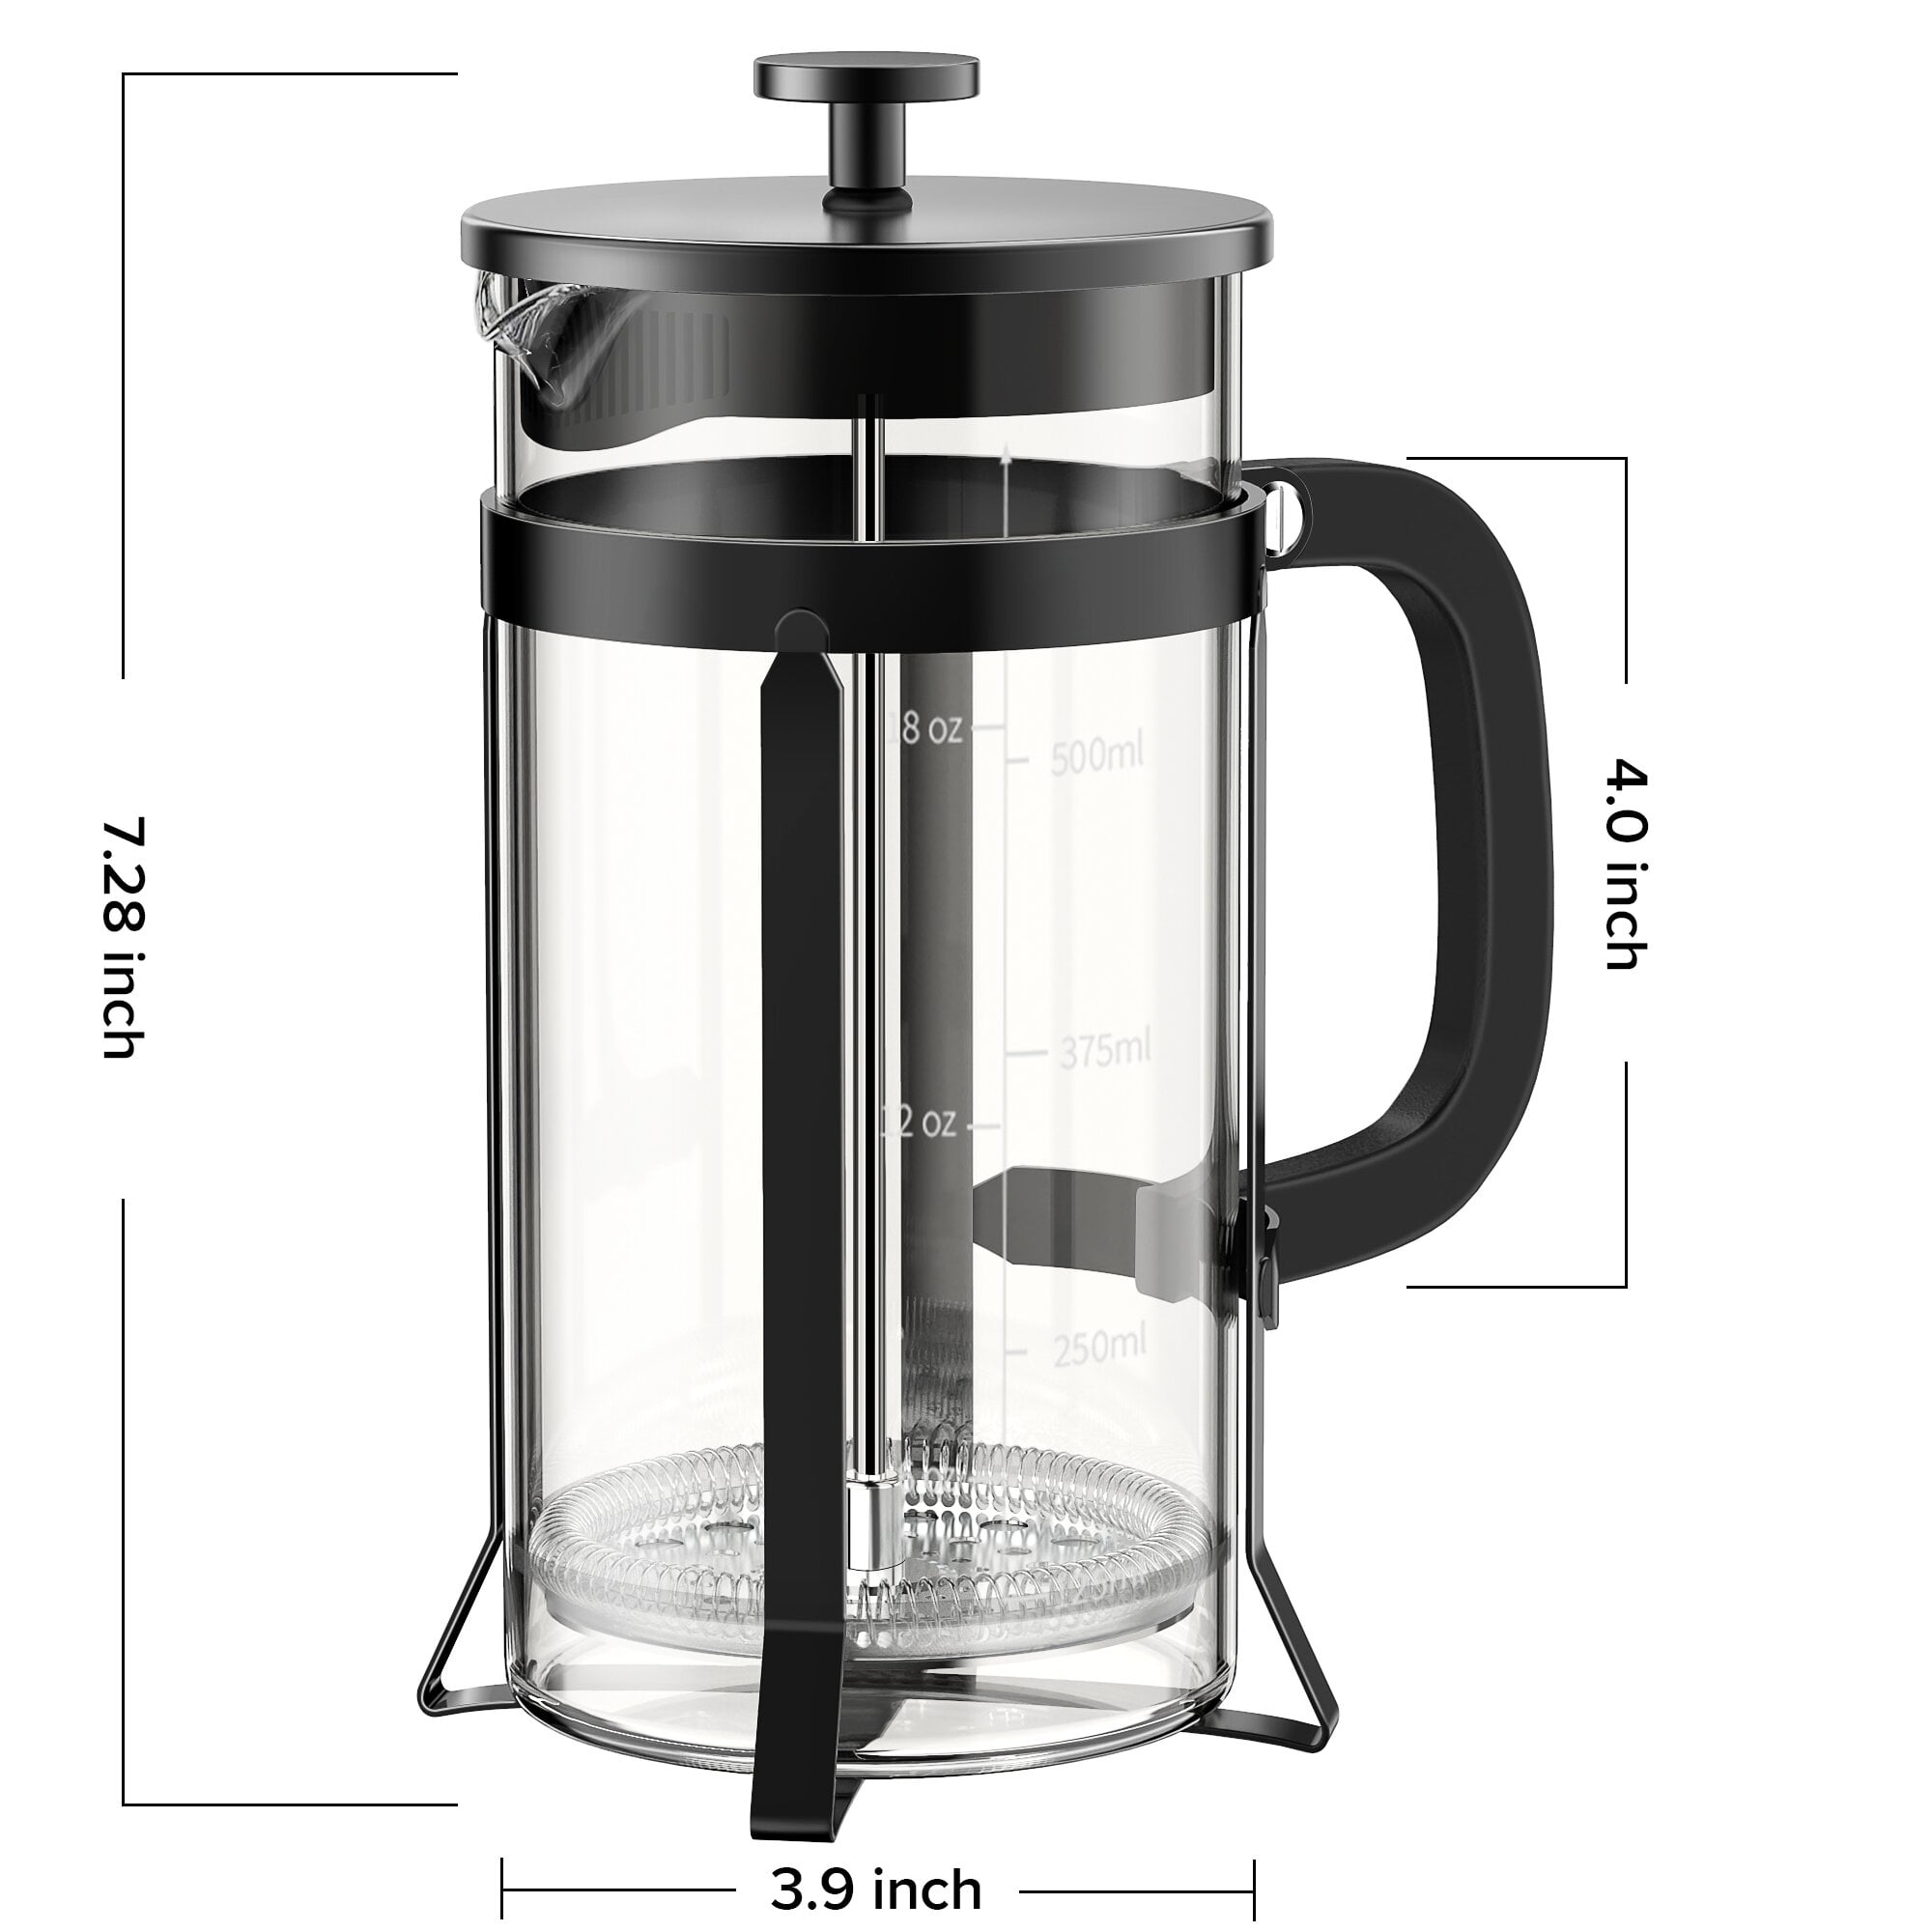 QUQIYSO French Press Coffee Maker, 34 Ounce, 304 Stainless Steel